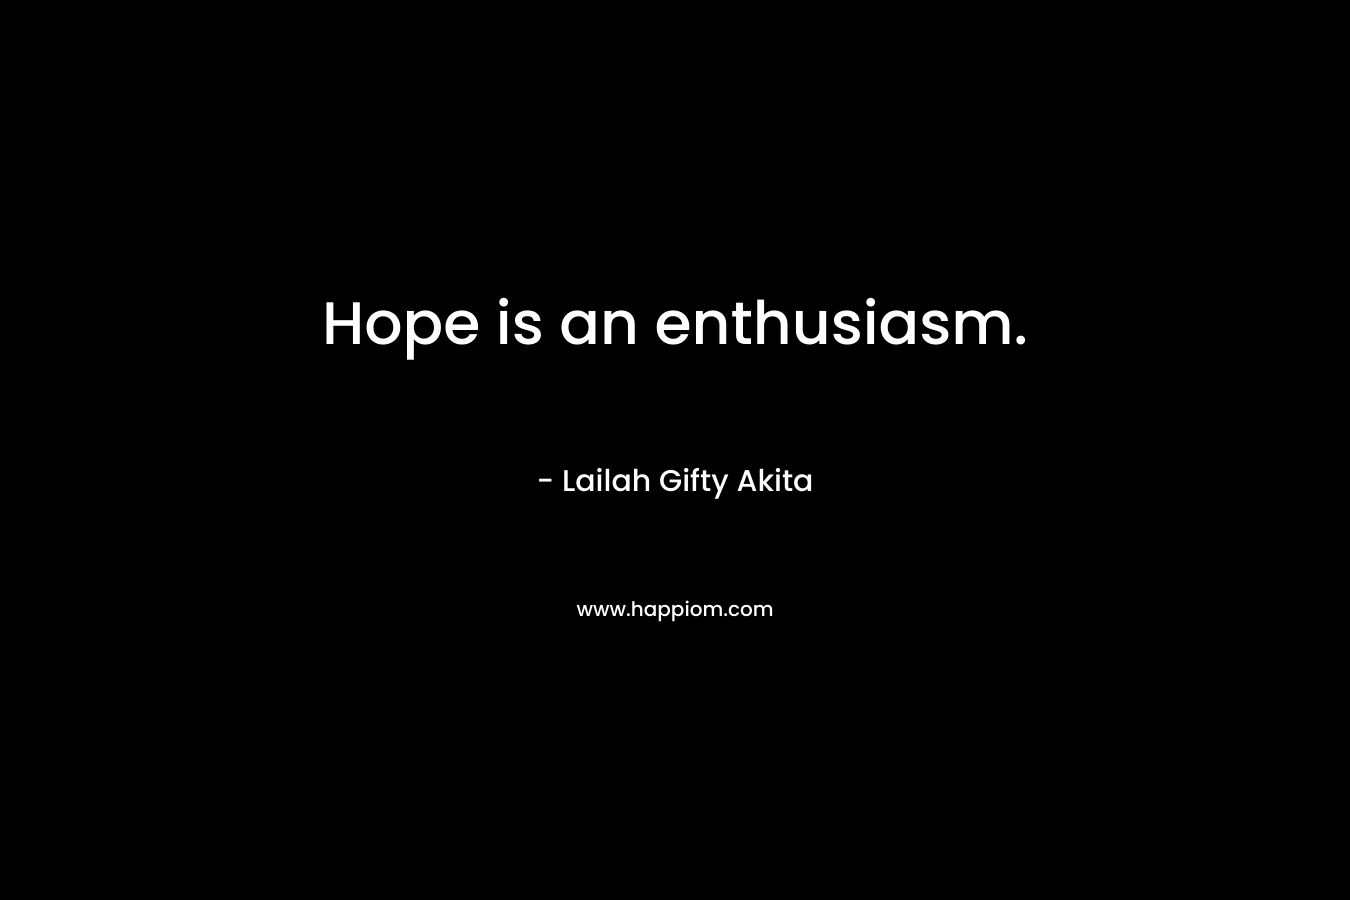 Hope is an enthusiasm.